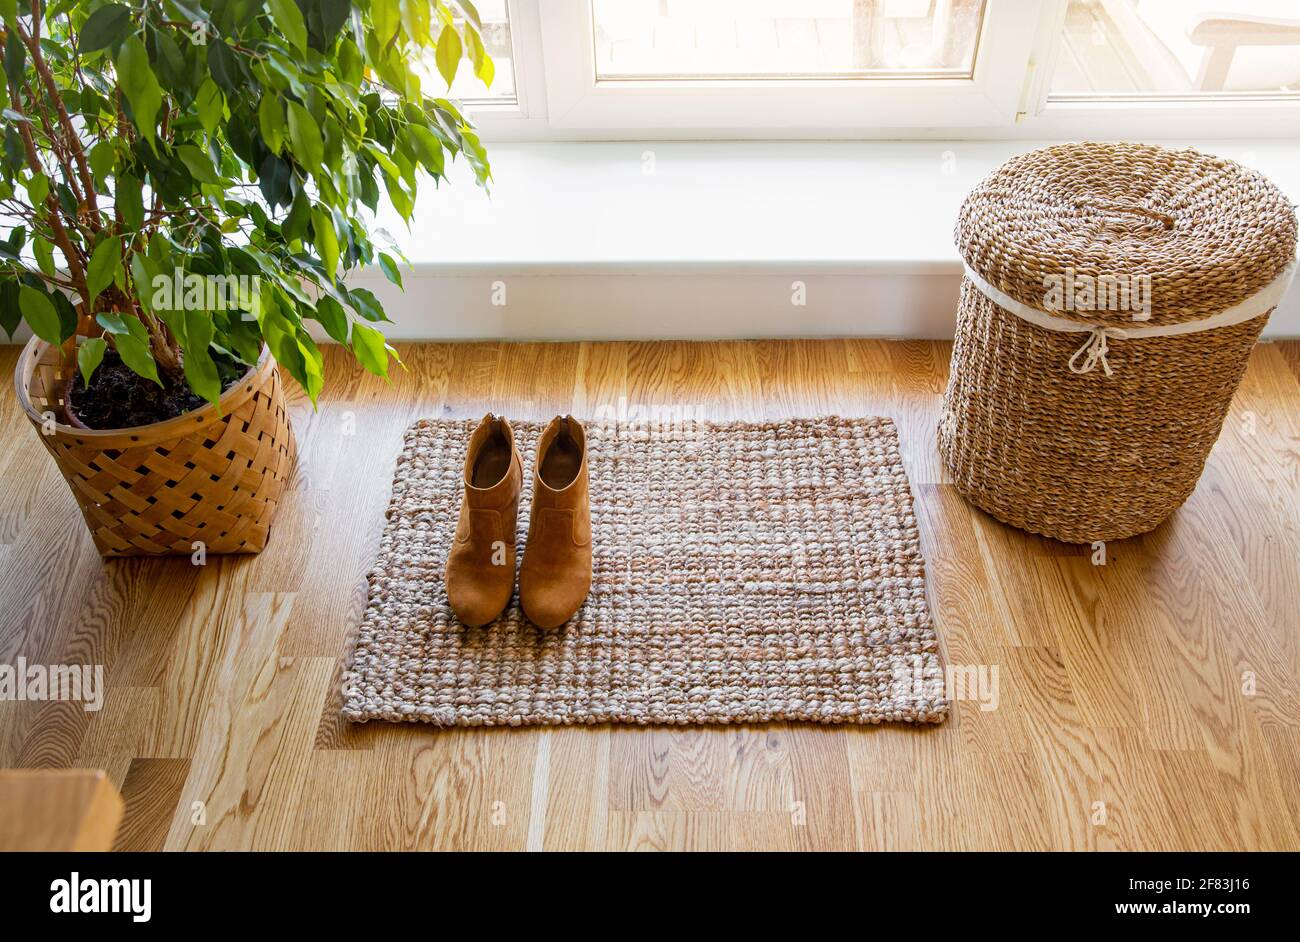 Hardwood floor with jute doormat, shoes and flower pot and seagrass laundry basket by window. Natural material objects in home concept. Home interior. Stock Photo